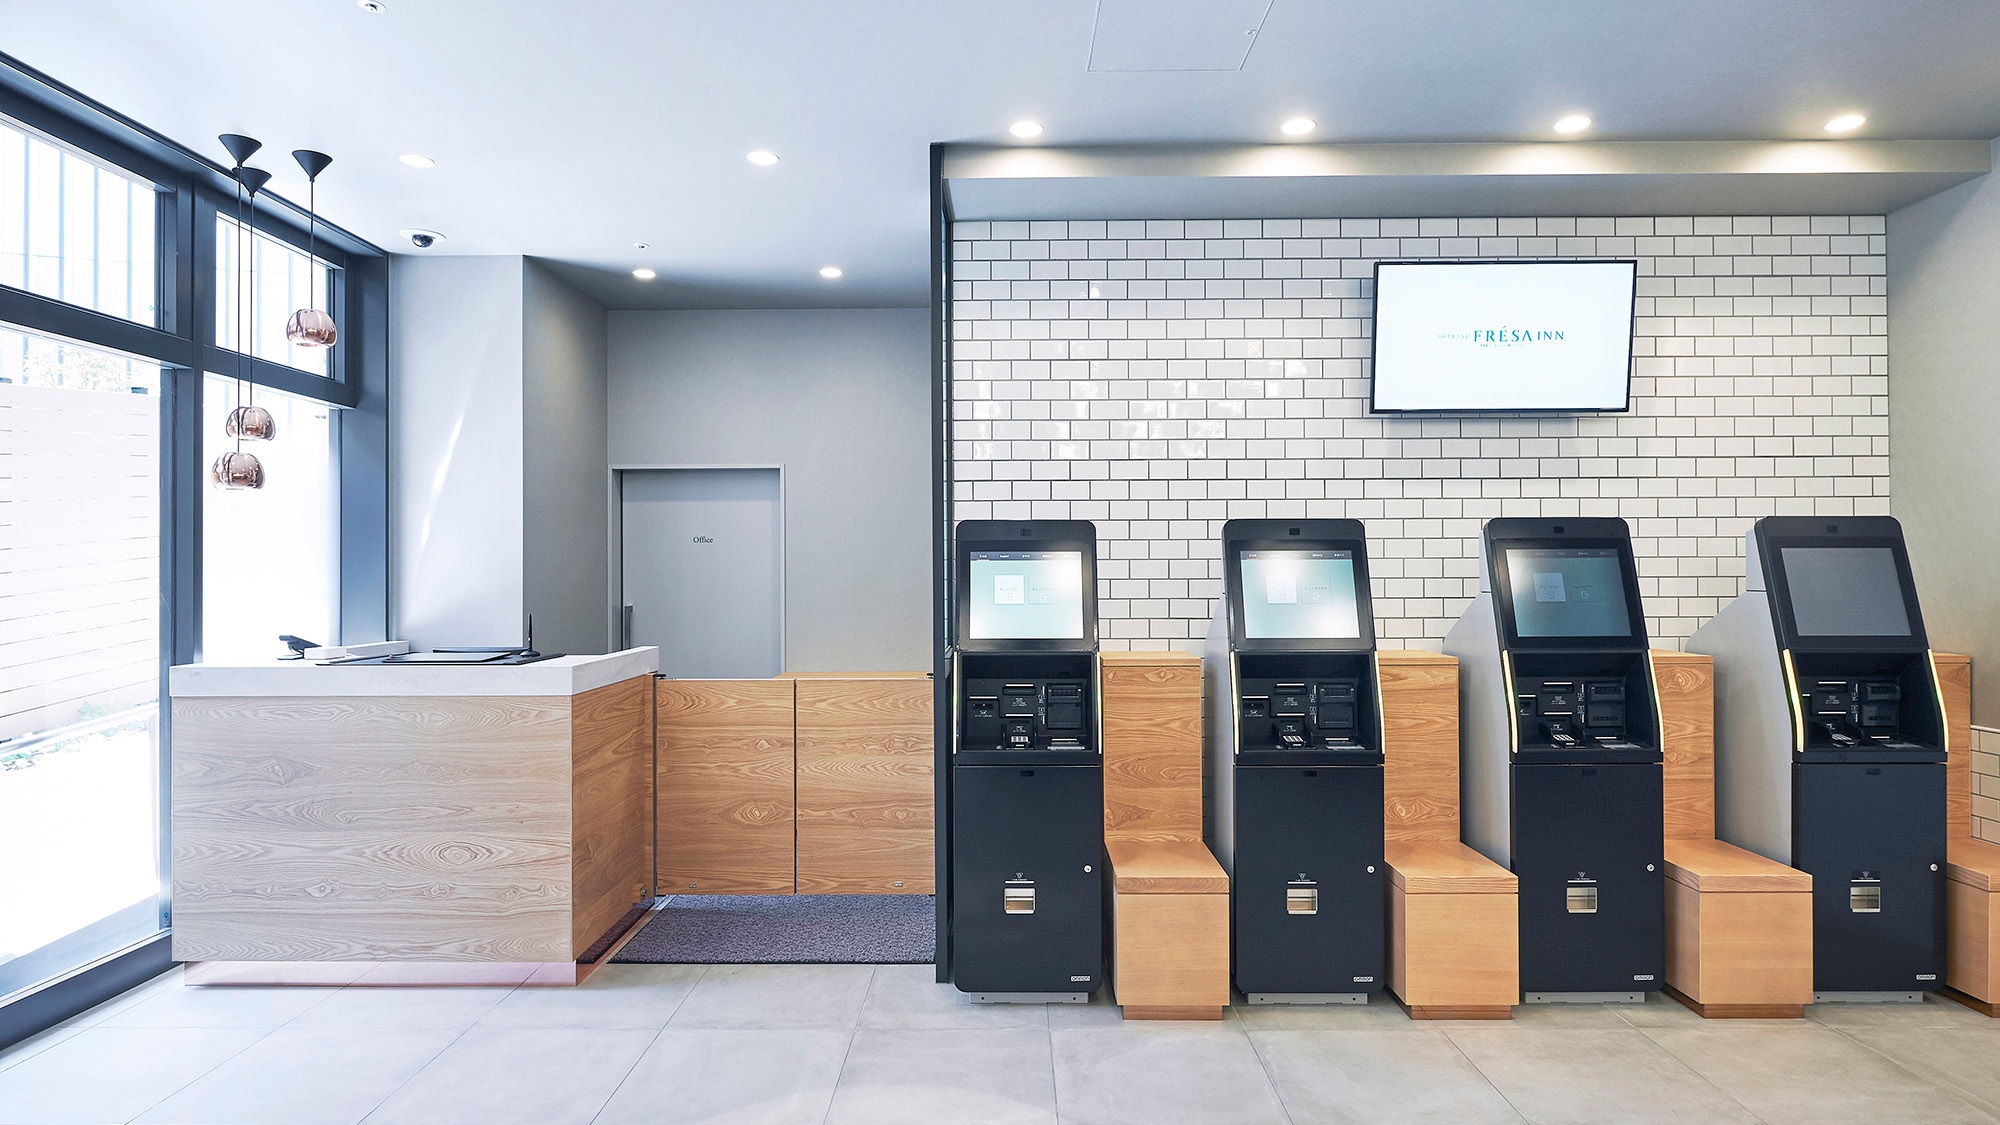 ・[Front] An automatic check-in machine is installed next to the staffed counter